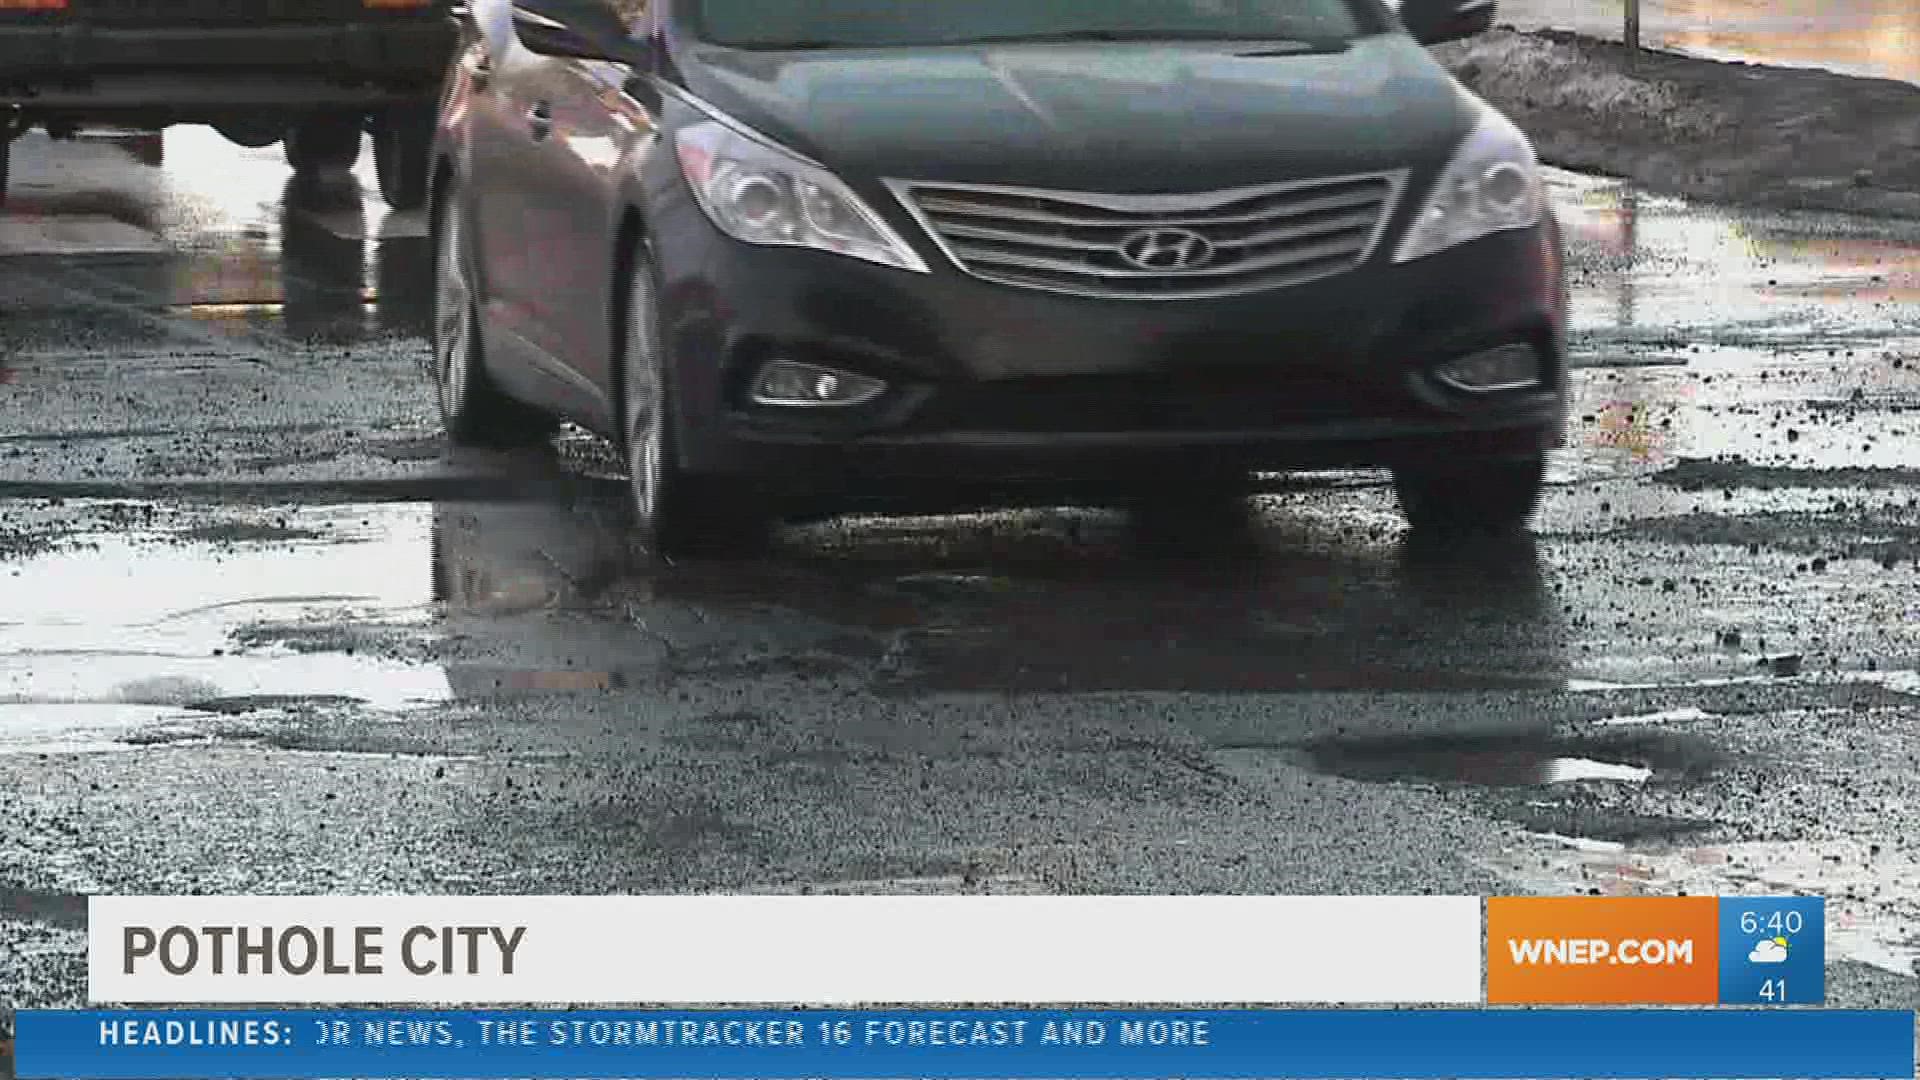 If there's one thing we hate while driving as it gets warmer, it's slamming into a pothole. Newswatch 16's Ryan has more on what you can do if you hit one.